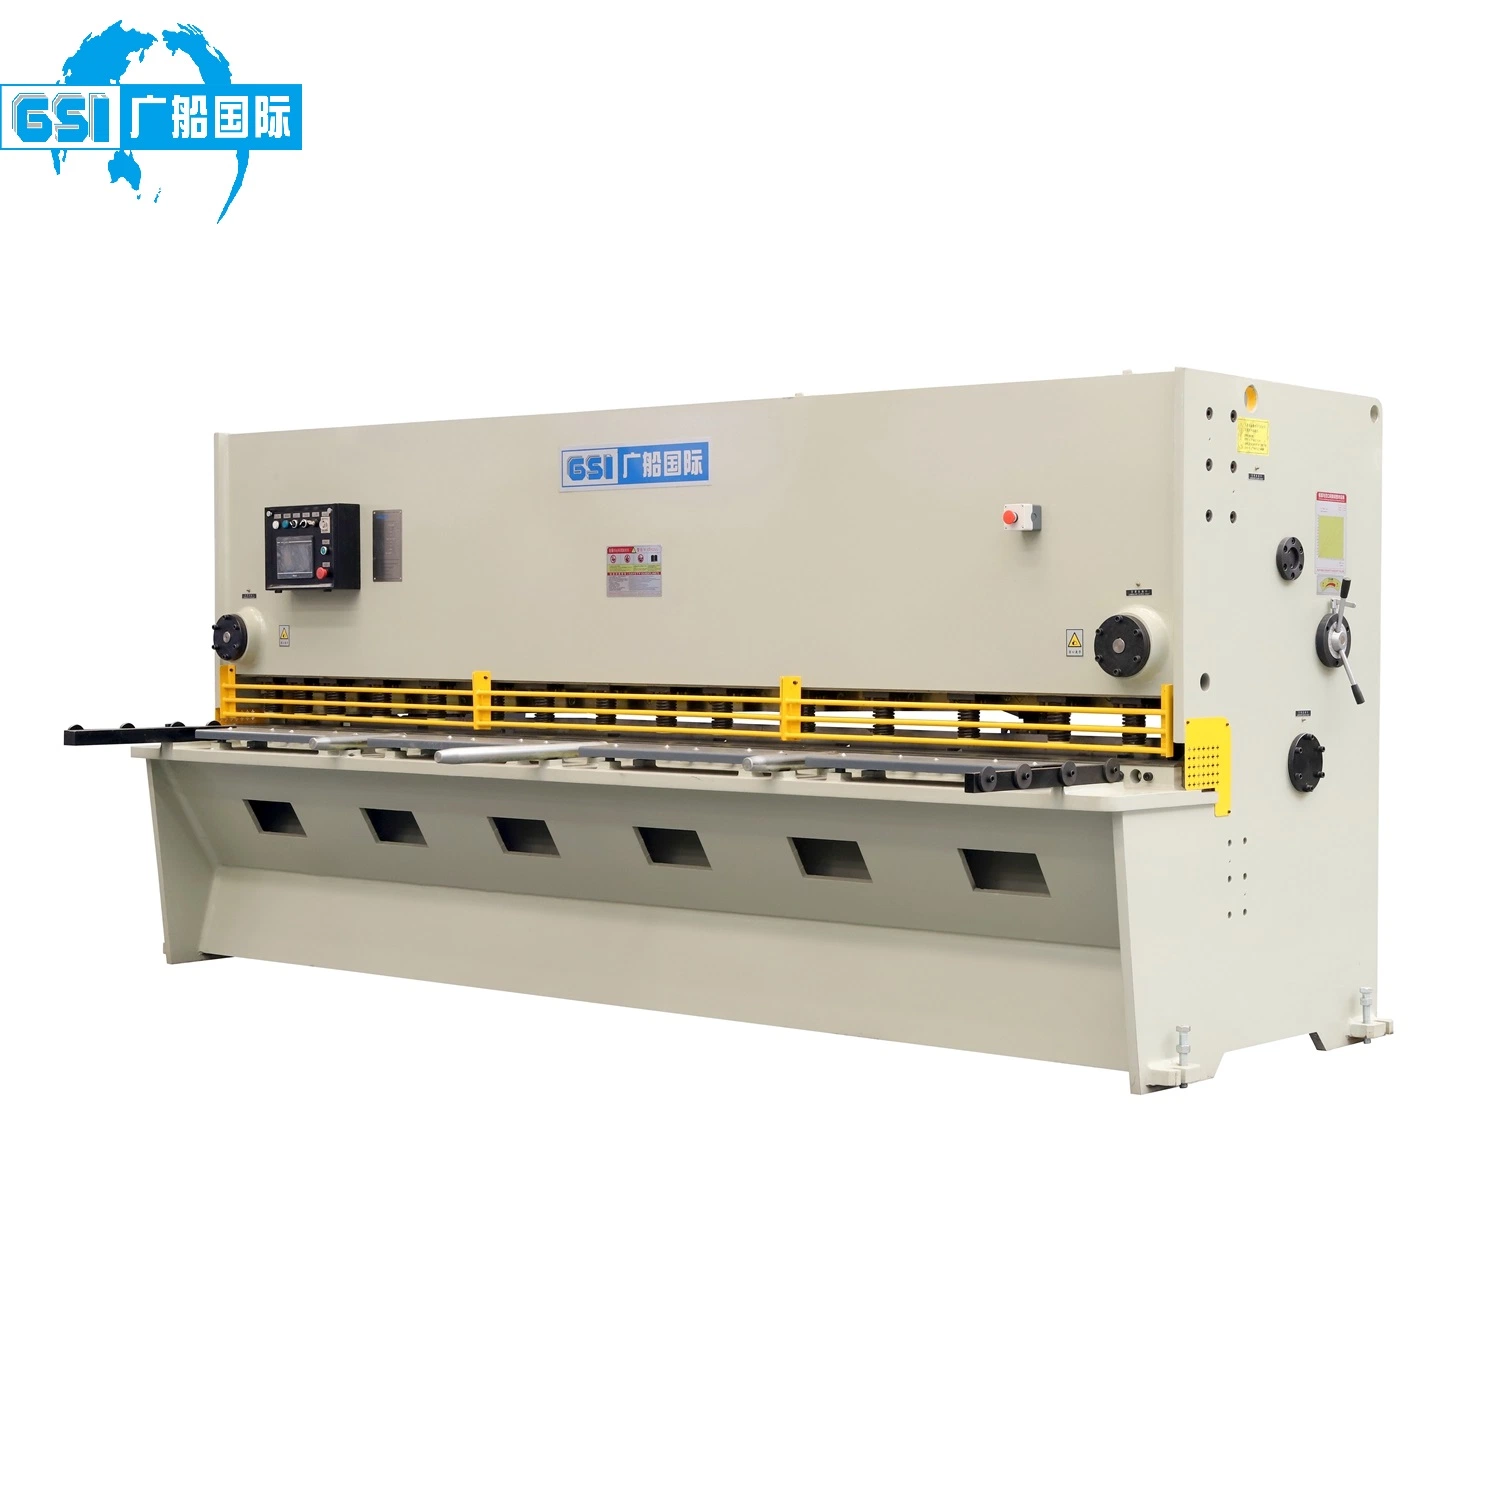 Mk-6X4000 Shearing Machine for Cutting Stainless Steel Mild Steel Plate Hydraulic CNC Guillotine Plate Shears